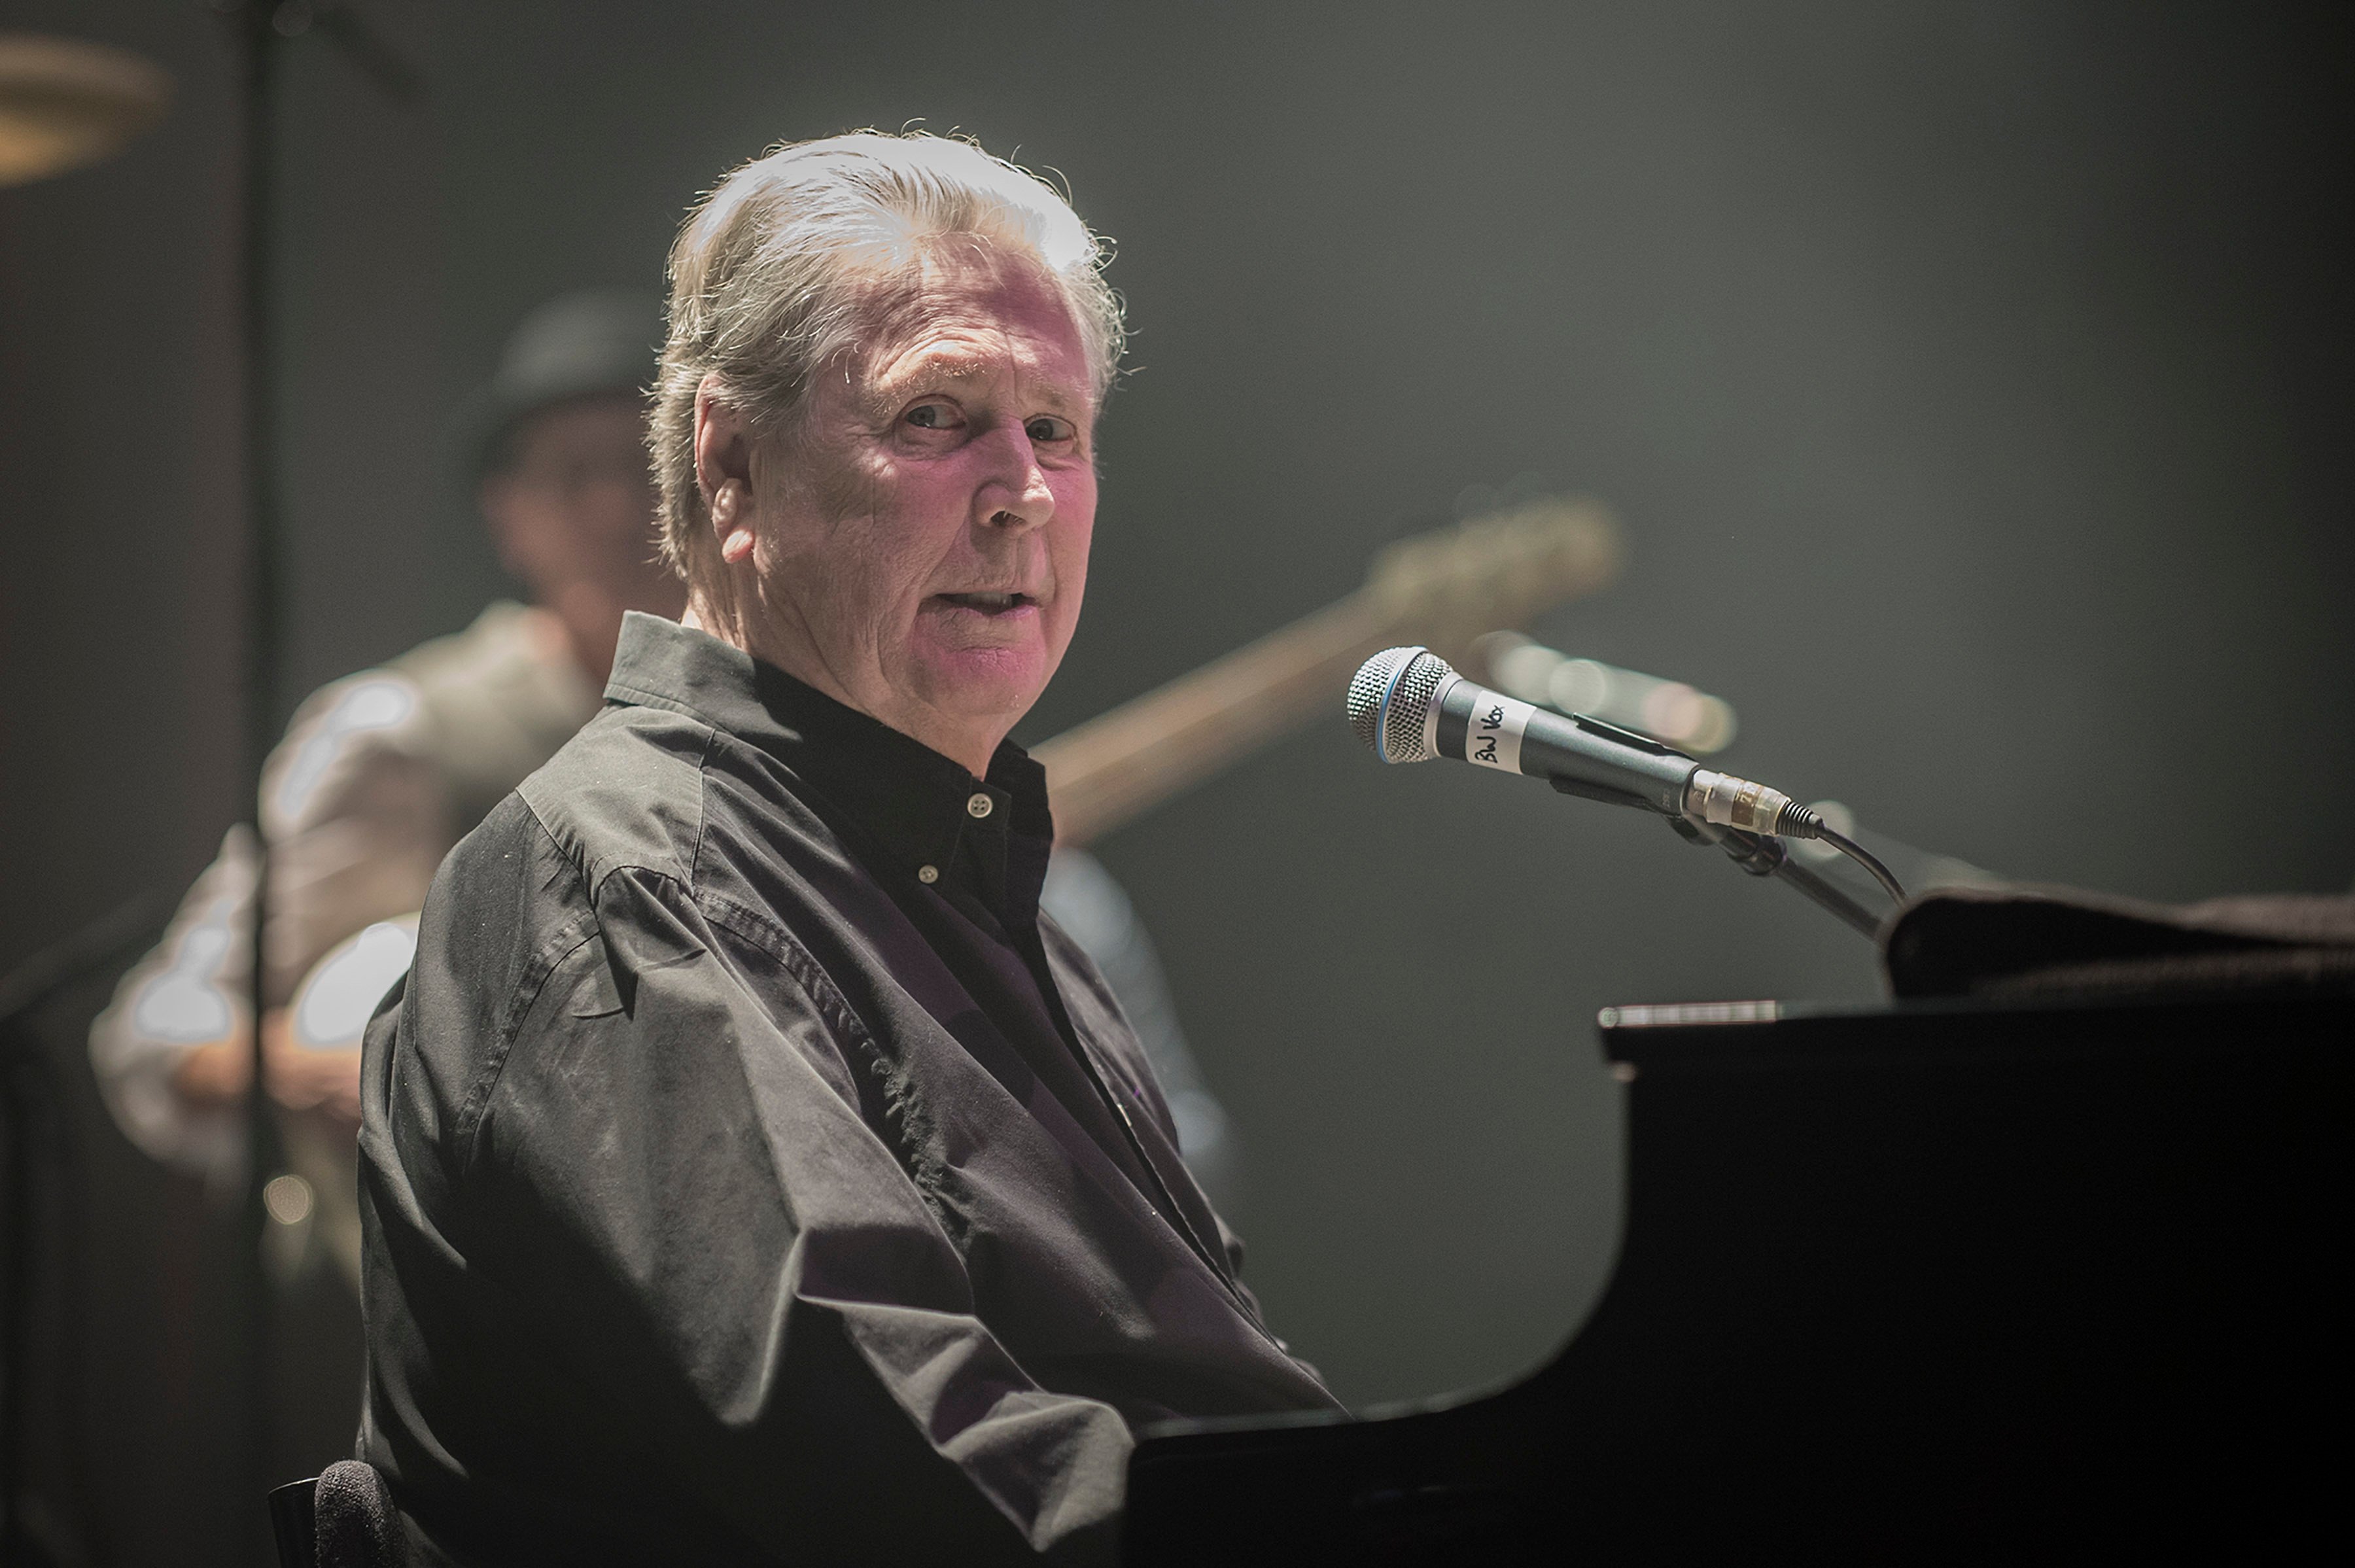 Brian Wilson performs Pet sounds at the Royal Albert Hall in London in 2016